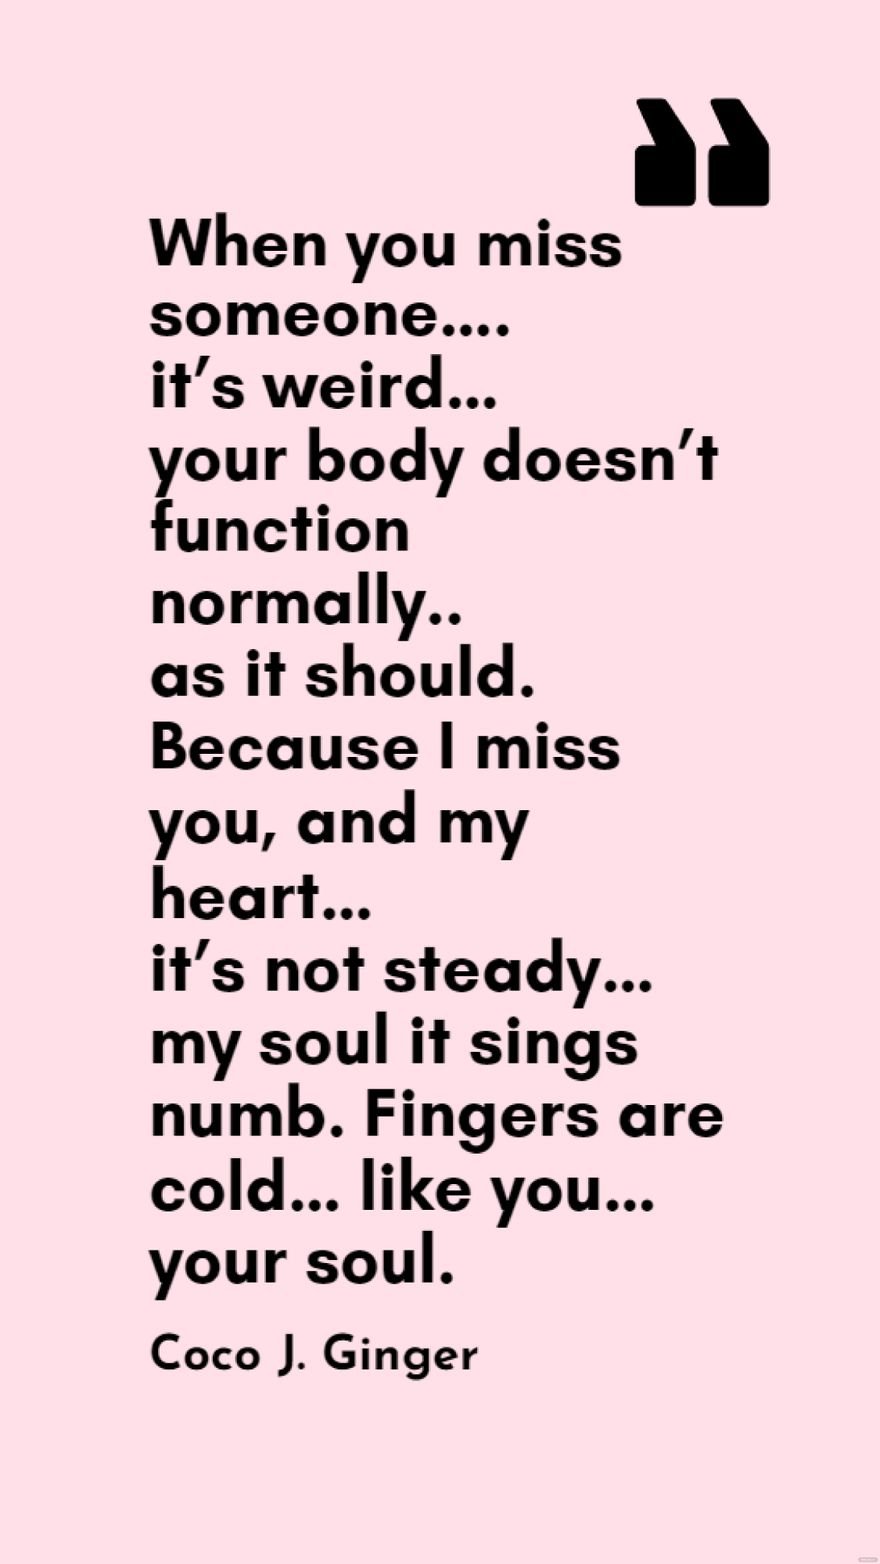 Coco J. Ginger - When you miss someone….it’s weird…your body doesn’t function normally..as it should. Because I miss you, and my heart…it’s not steady…my soul it sings numb. Fingers are cold…like you…